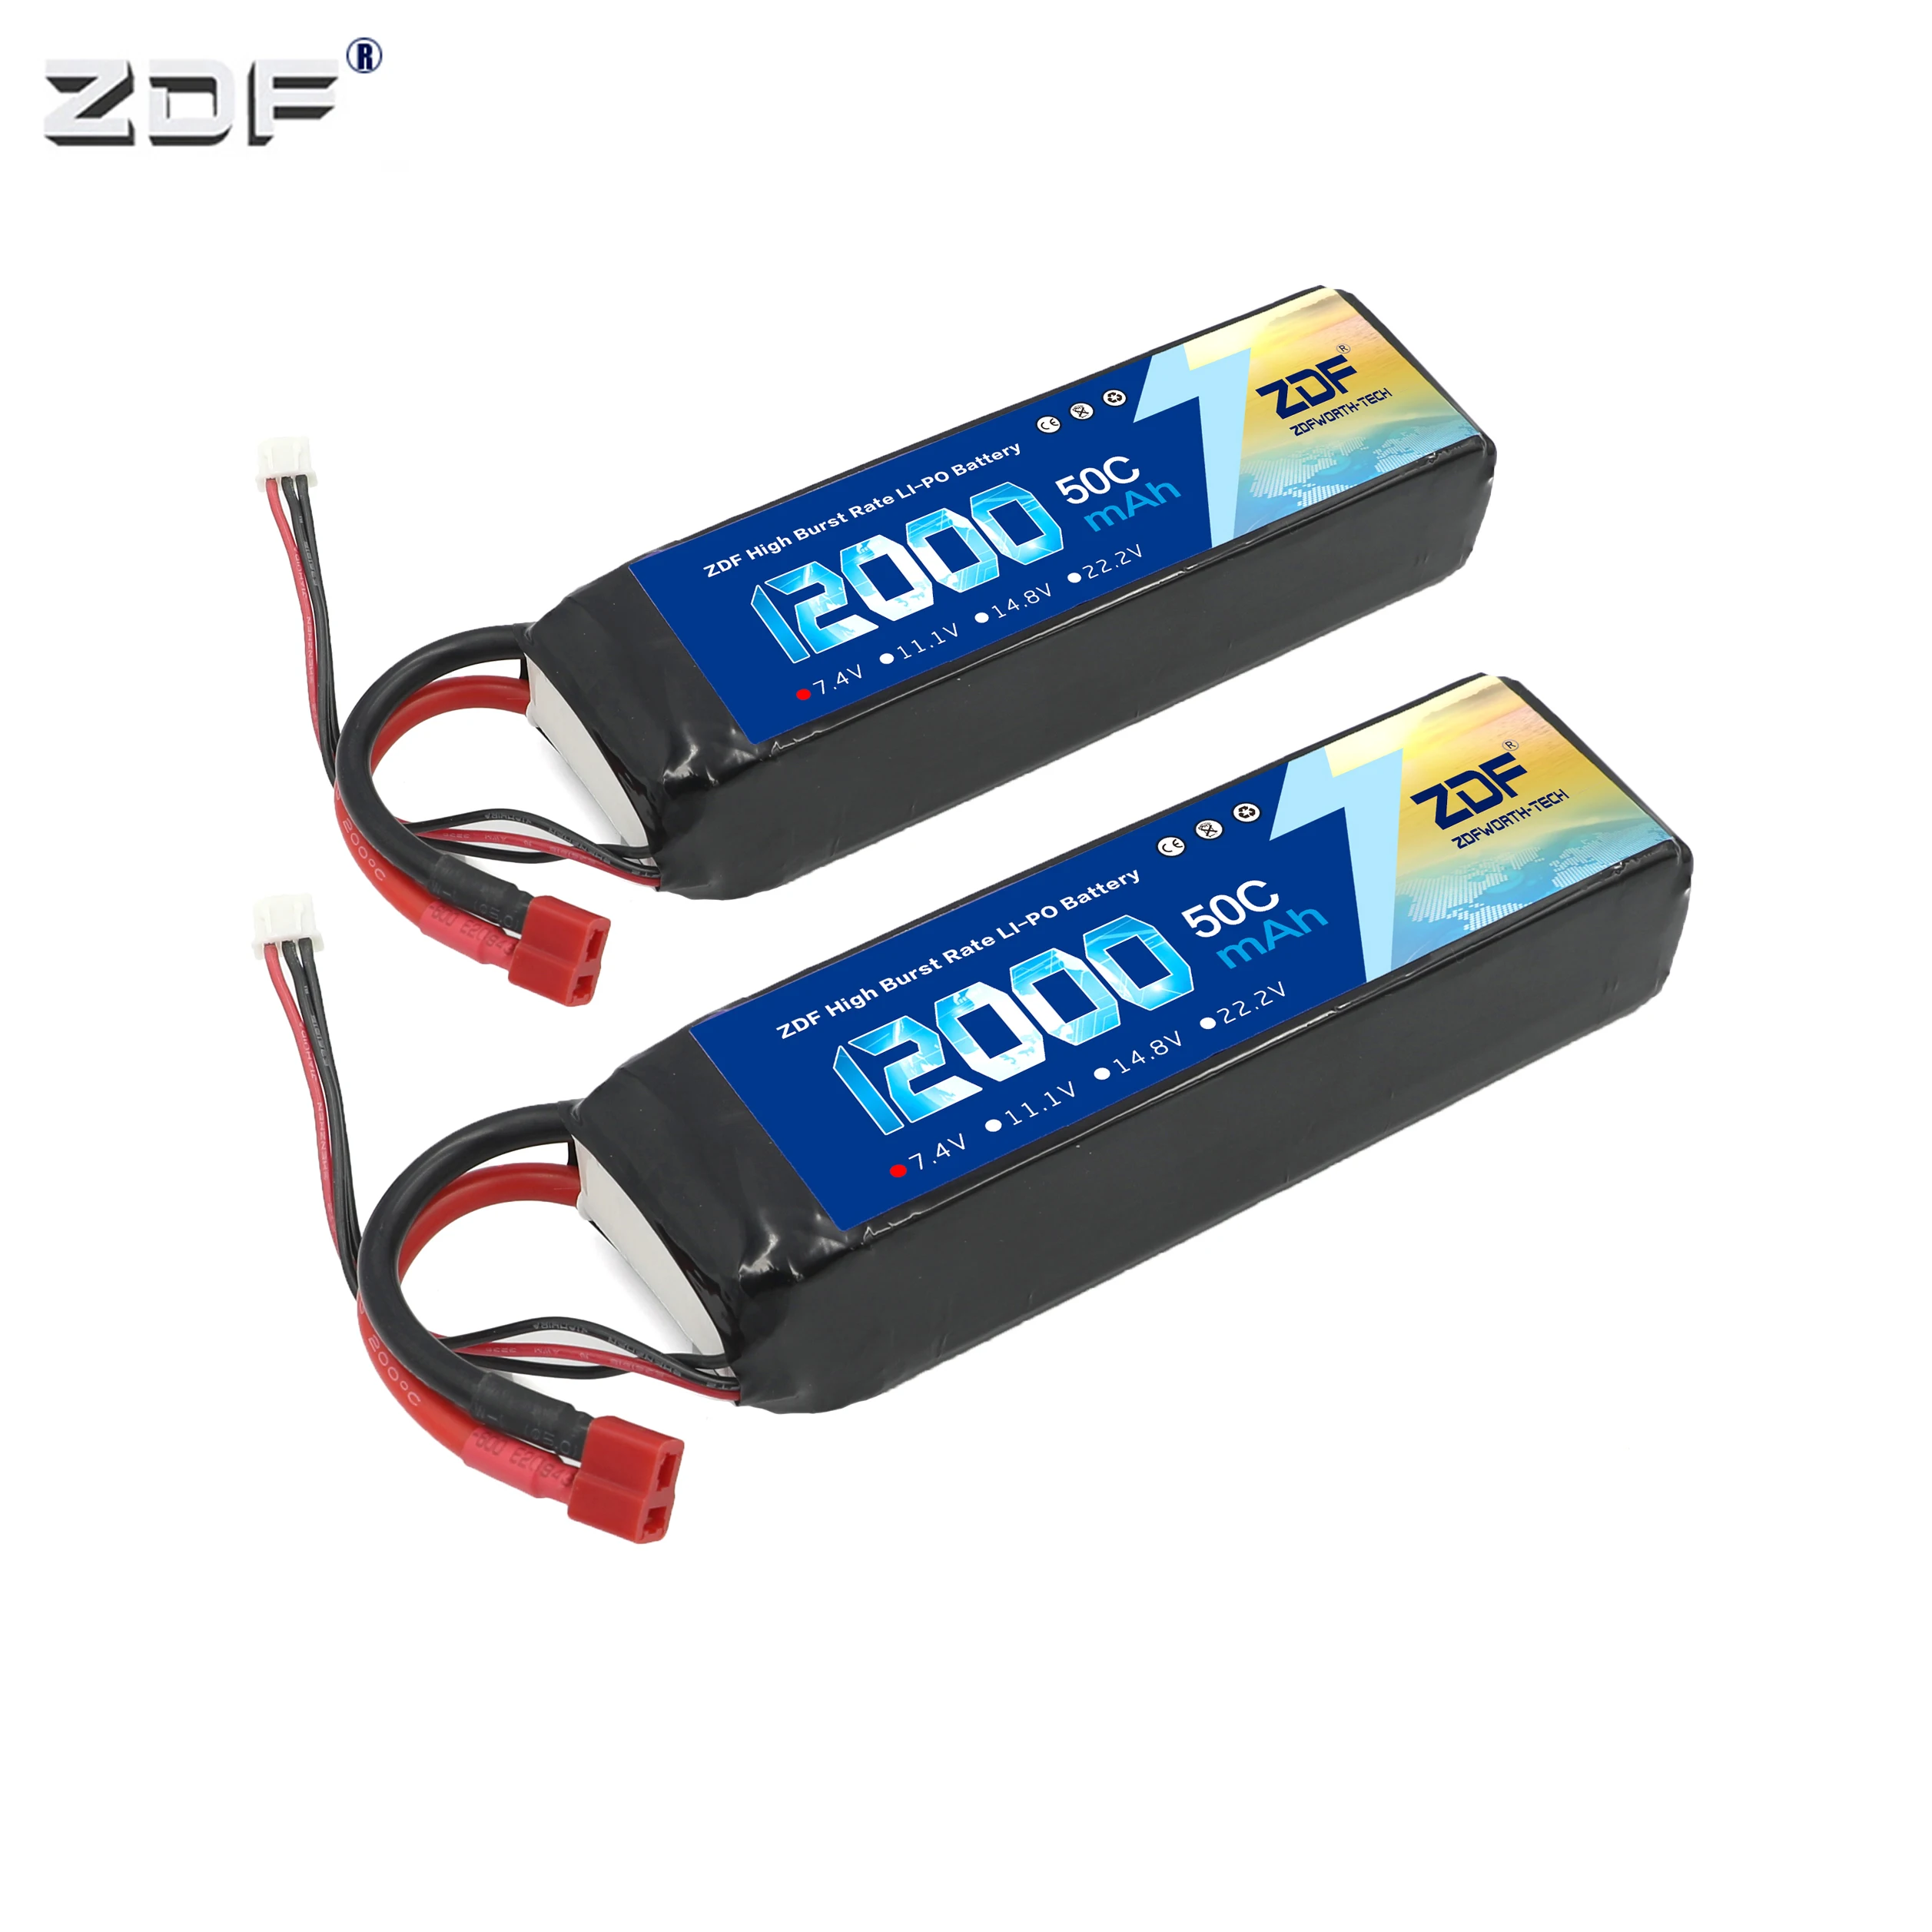 HRB 2S 7.4v 1800mah 50C 100C RC Lipo Battery for FPV Boat Race Drone Quadcopter